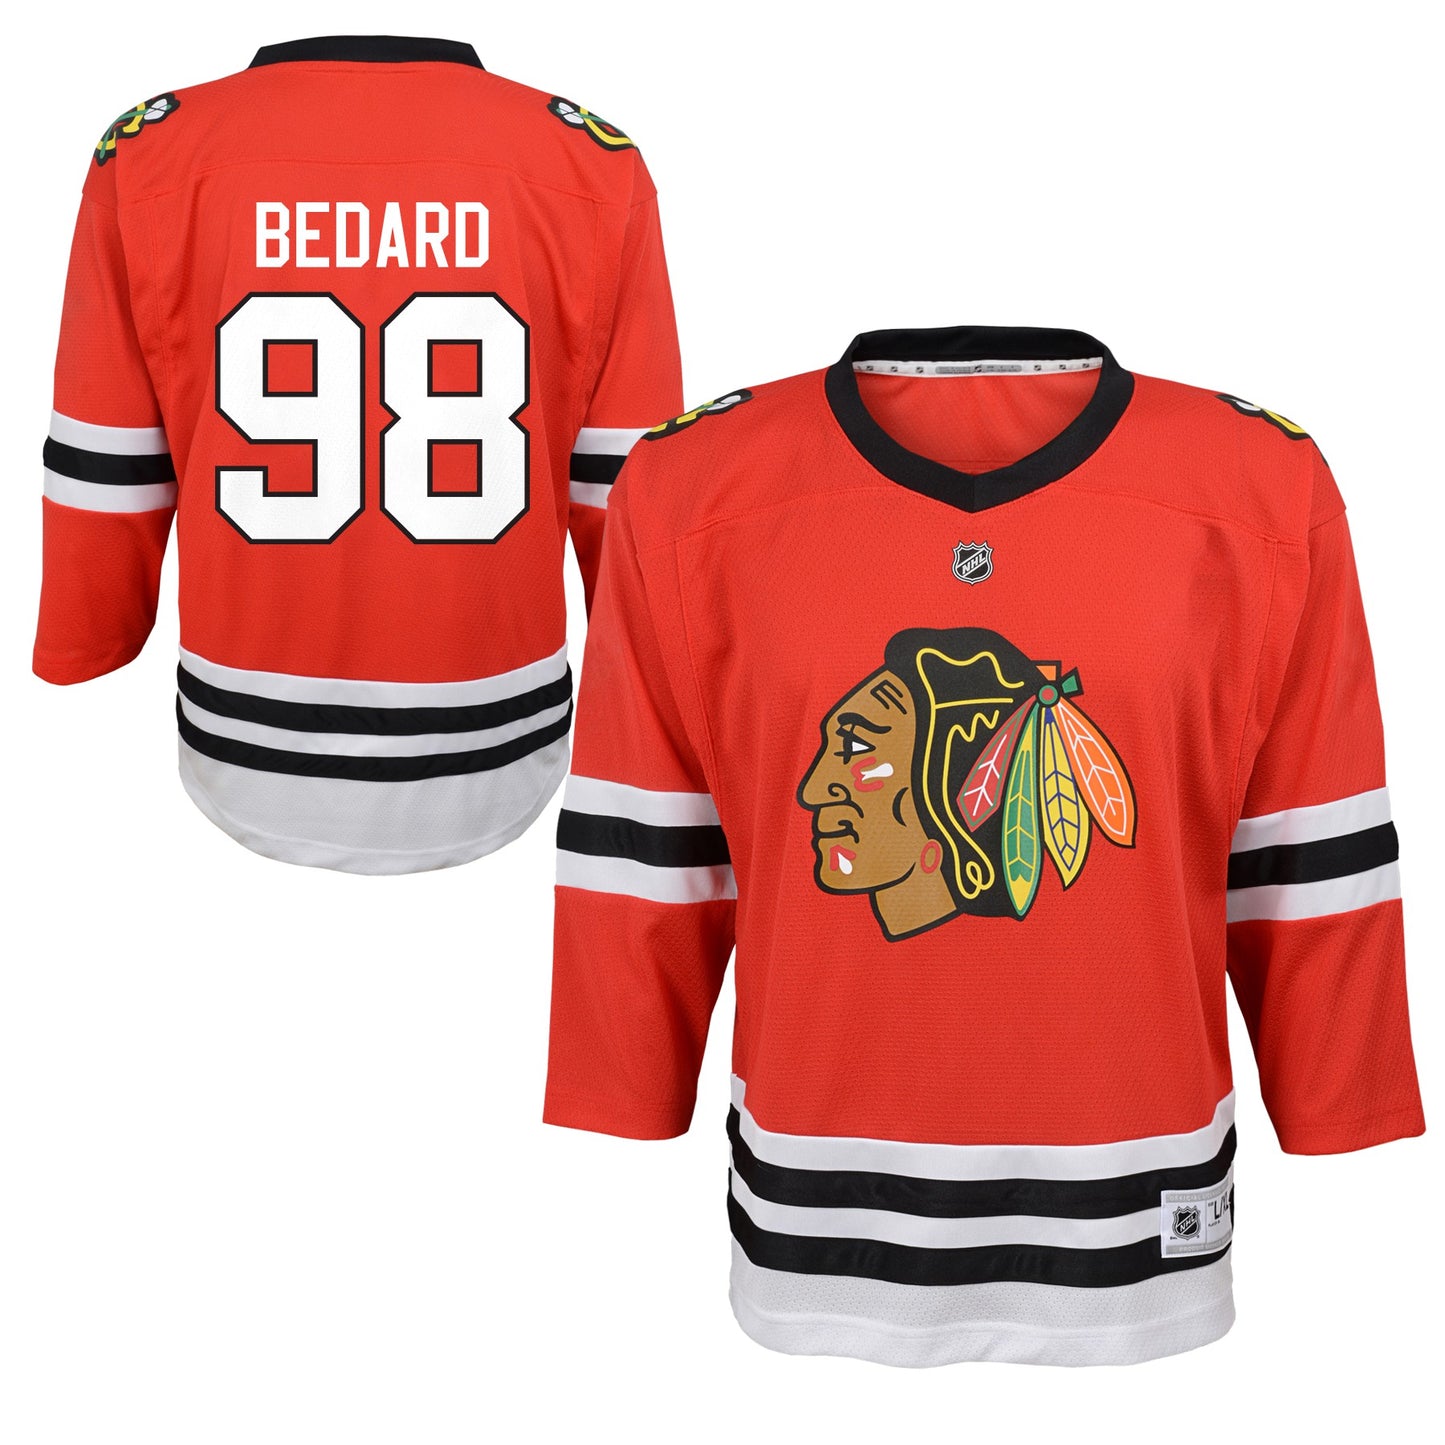 Connor Bedard Chicago Blackhawks Home Red Replica Infant Jersey